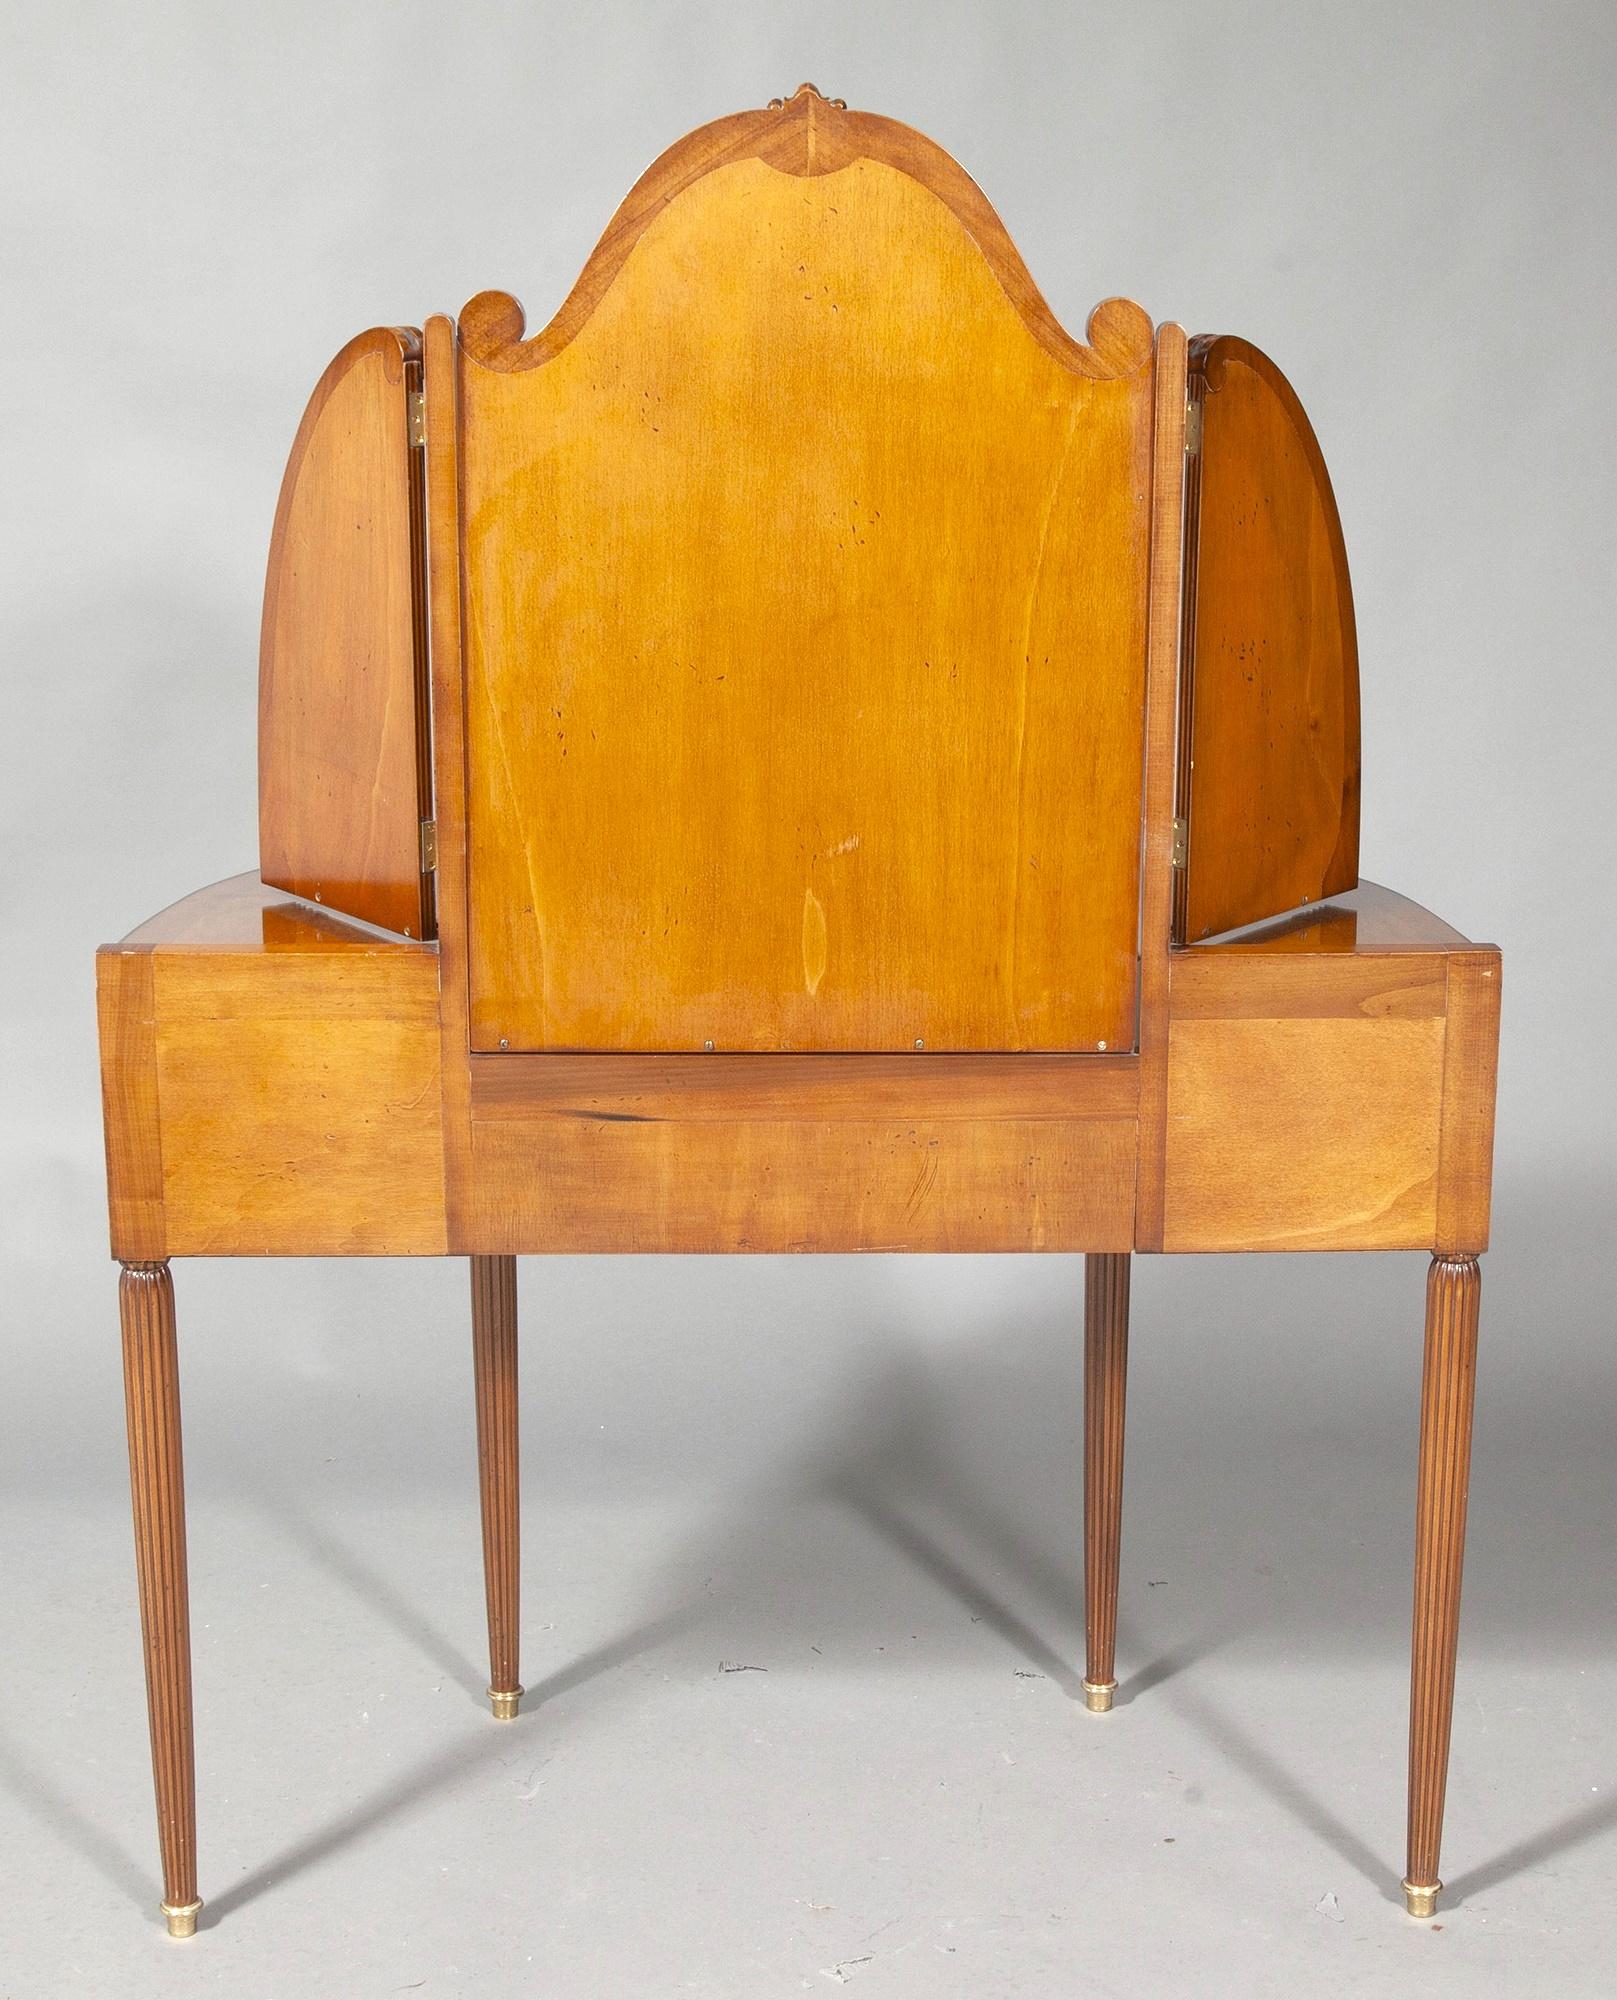 20th Century Italian Edwardian Style Walnut Vanity Dressing Table With Chair For Sale